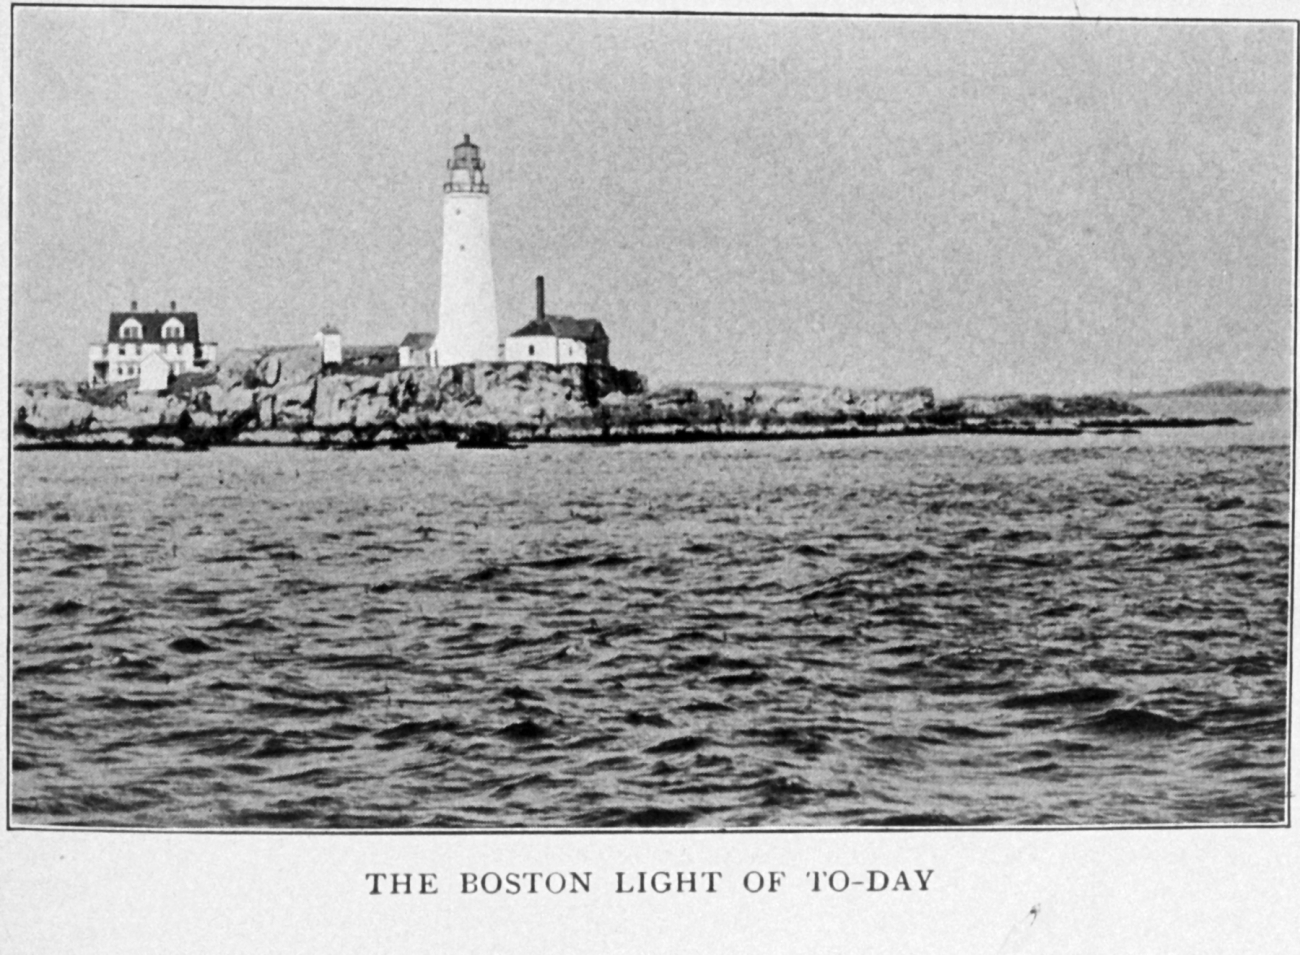 The Boston Light of Today (1917)